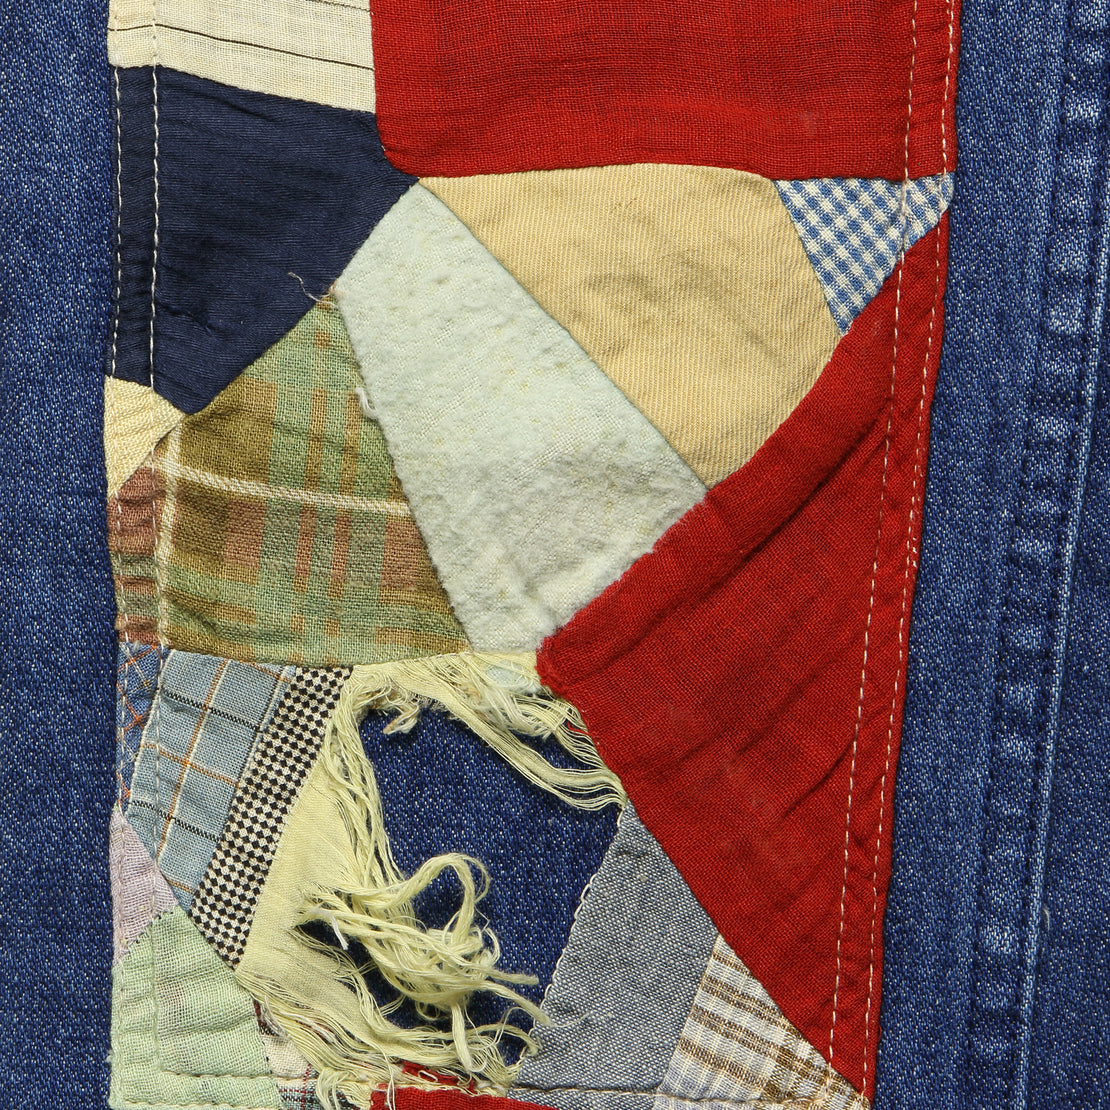 Quilt Patch Jean - Carleen - STAG Provisions - W - Pants - Denim